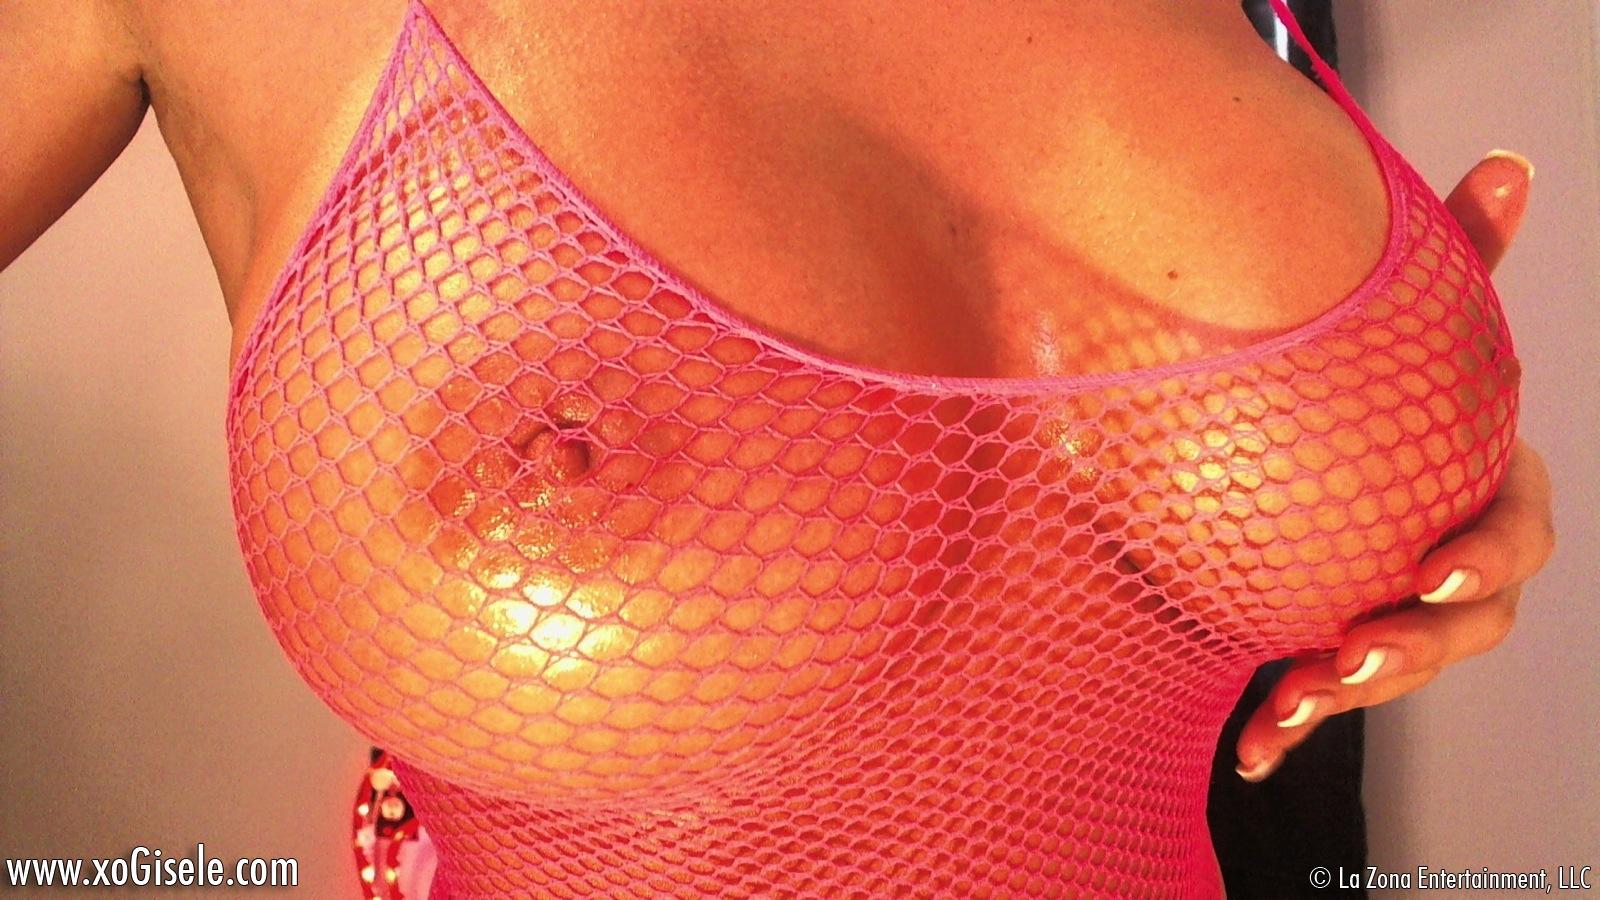 xoGisele rubs hot oil all over her hot body and takes off her tight fishnet bodysuit #59098975